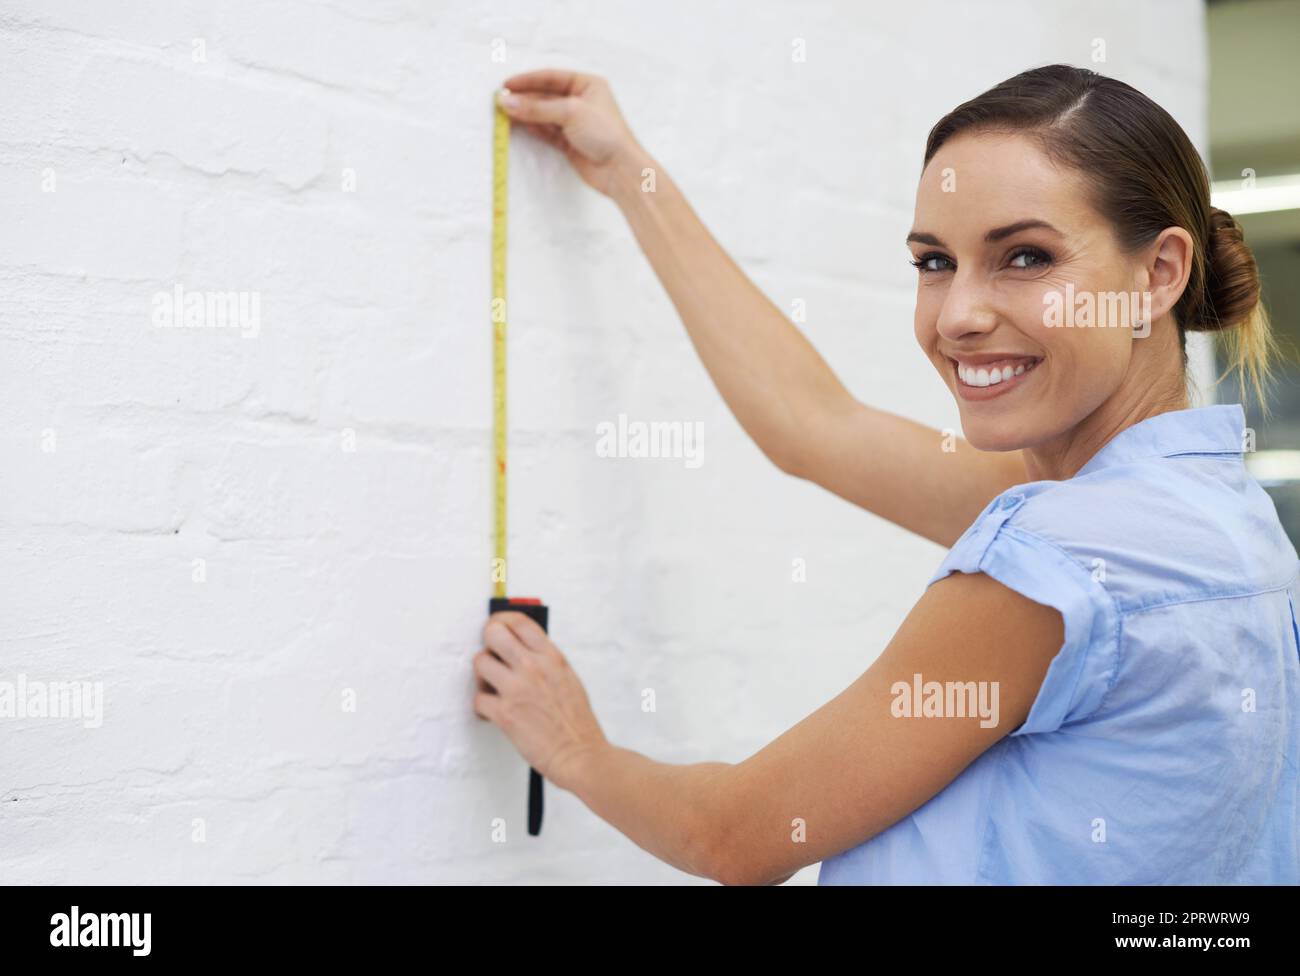 Perfect spot for my new painting. a smiling woman making measurements on a wall. Stock Photo